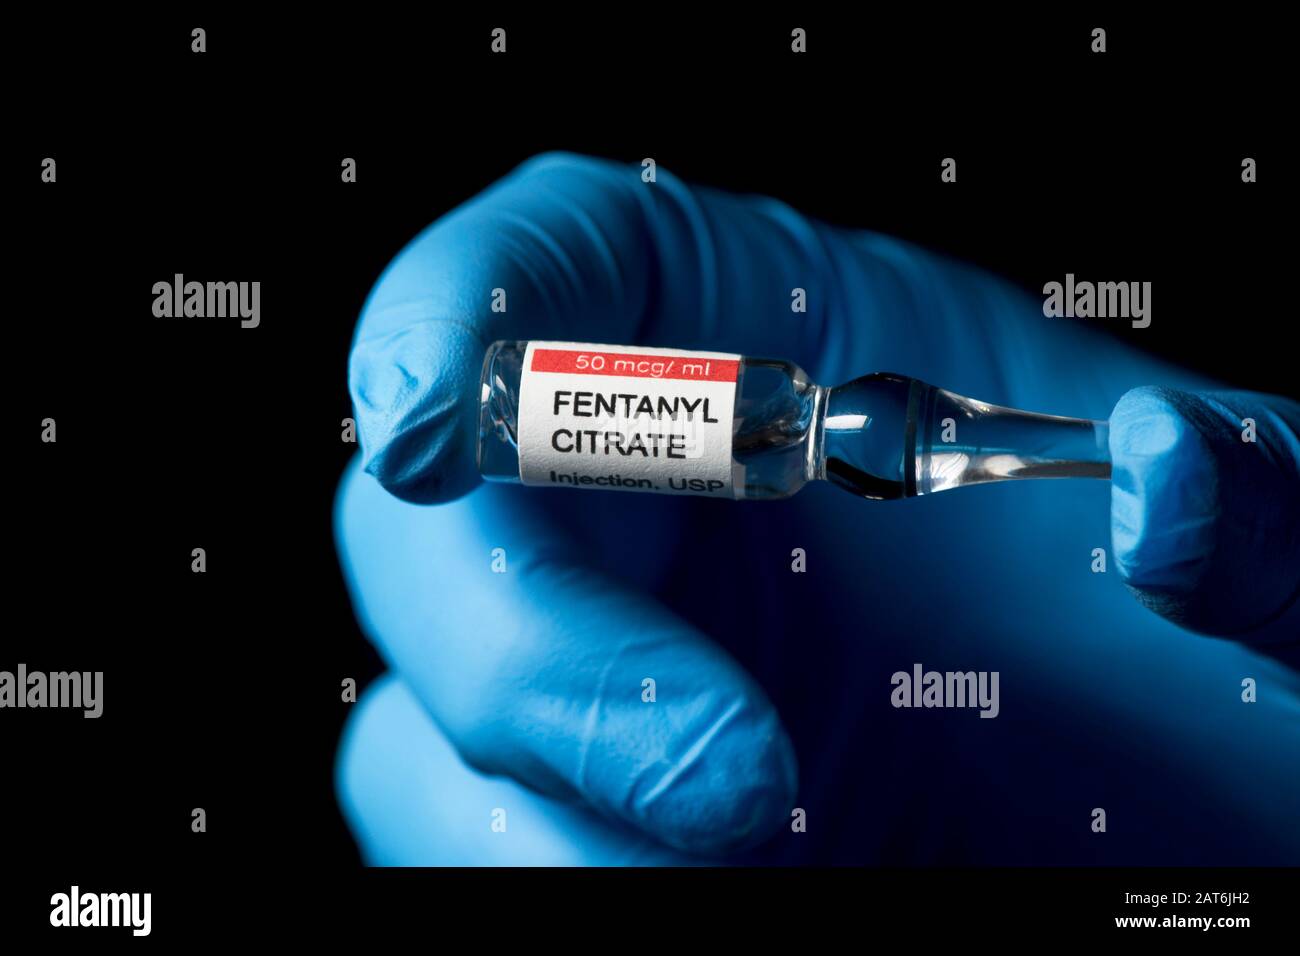 Fentanyl citrate injection ampule held by gloved hand of healthcare worker with dark background. Stock Photo